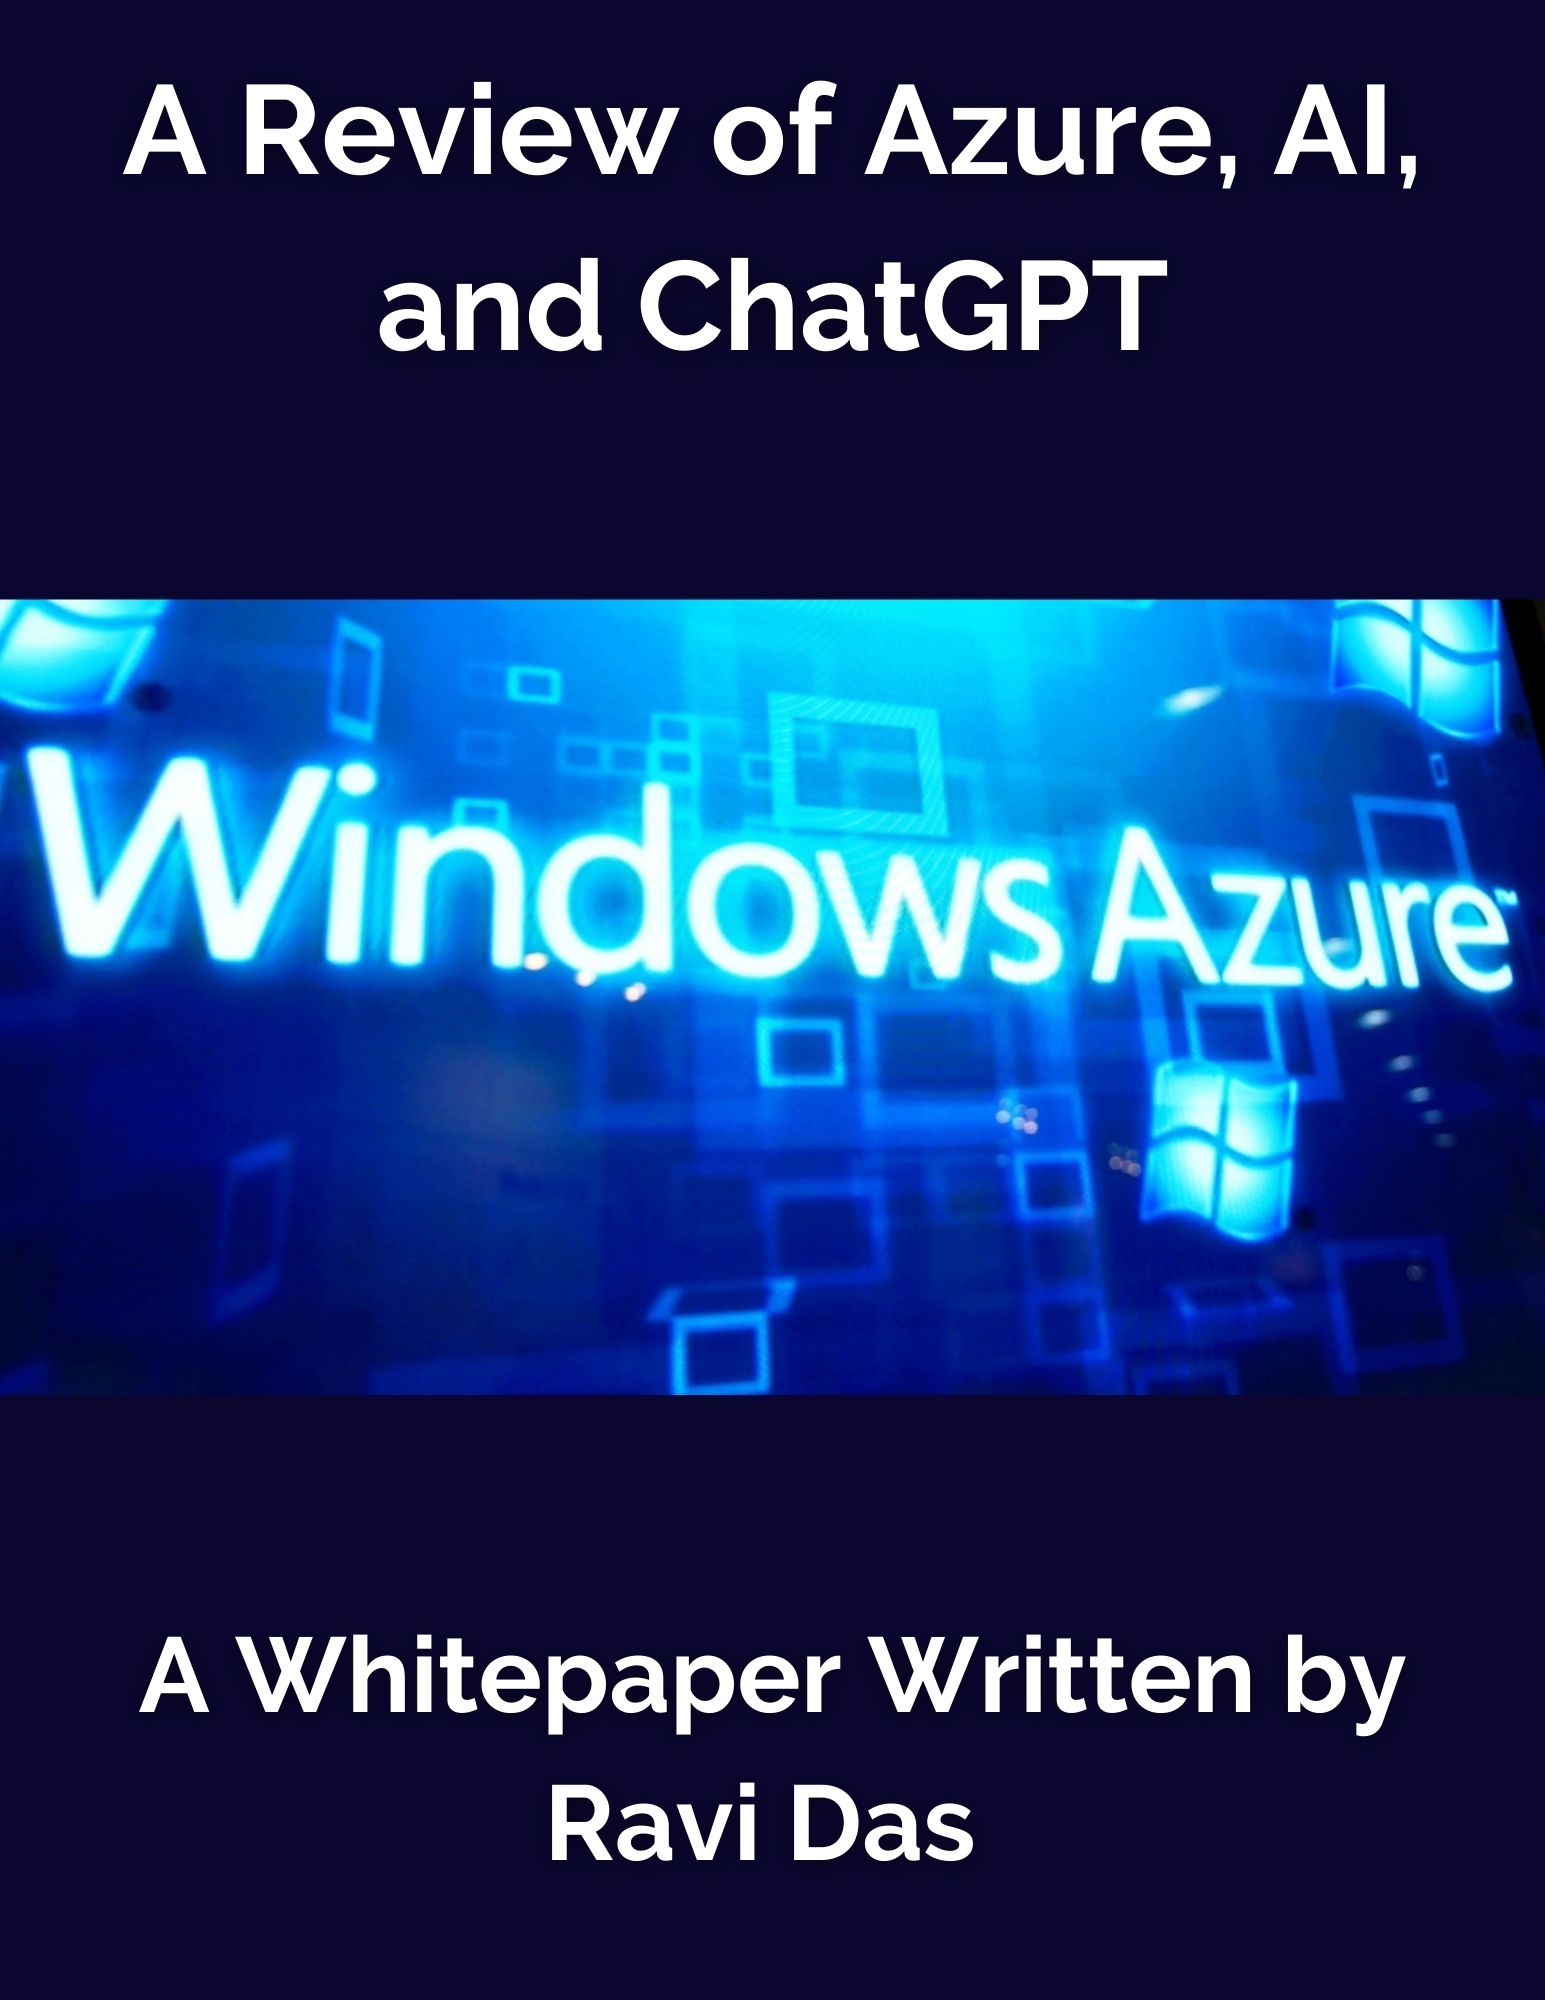 A Review of Azure, AI, and ChatGPT